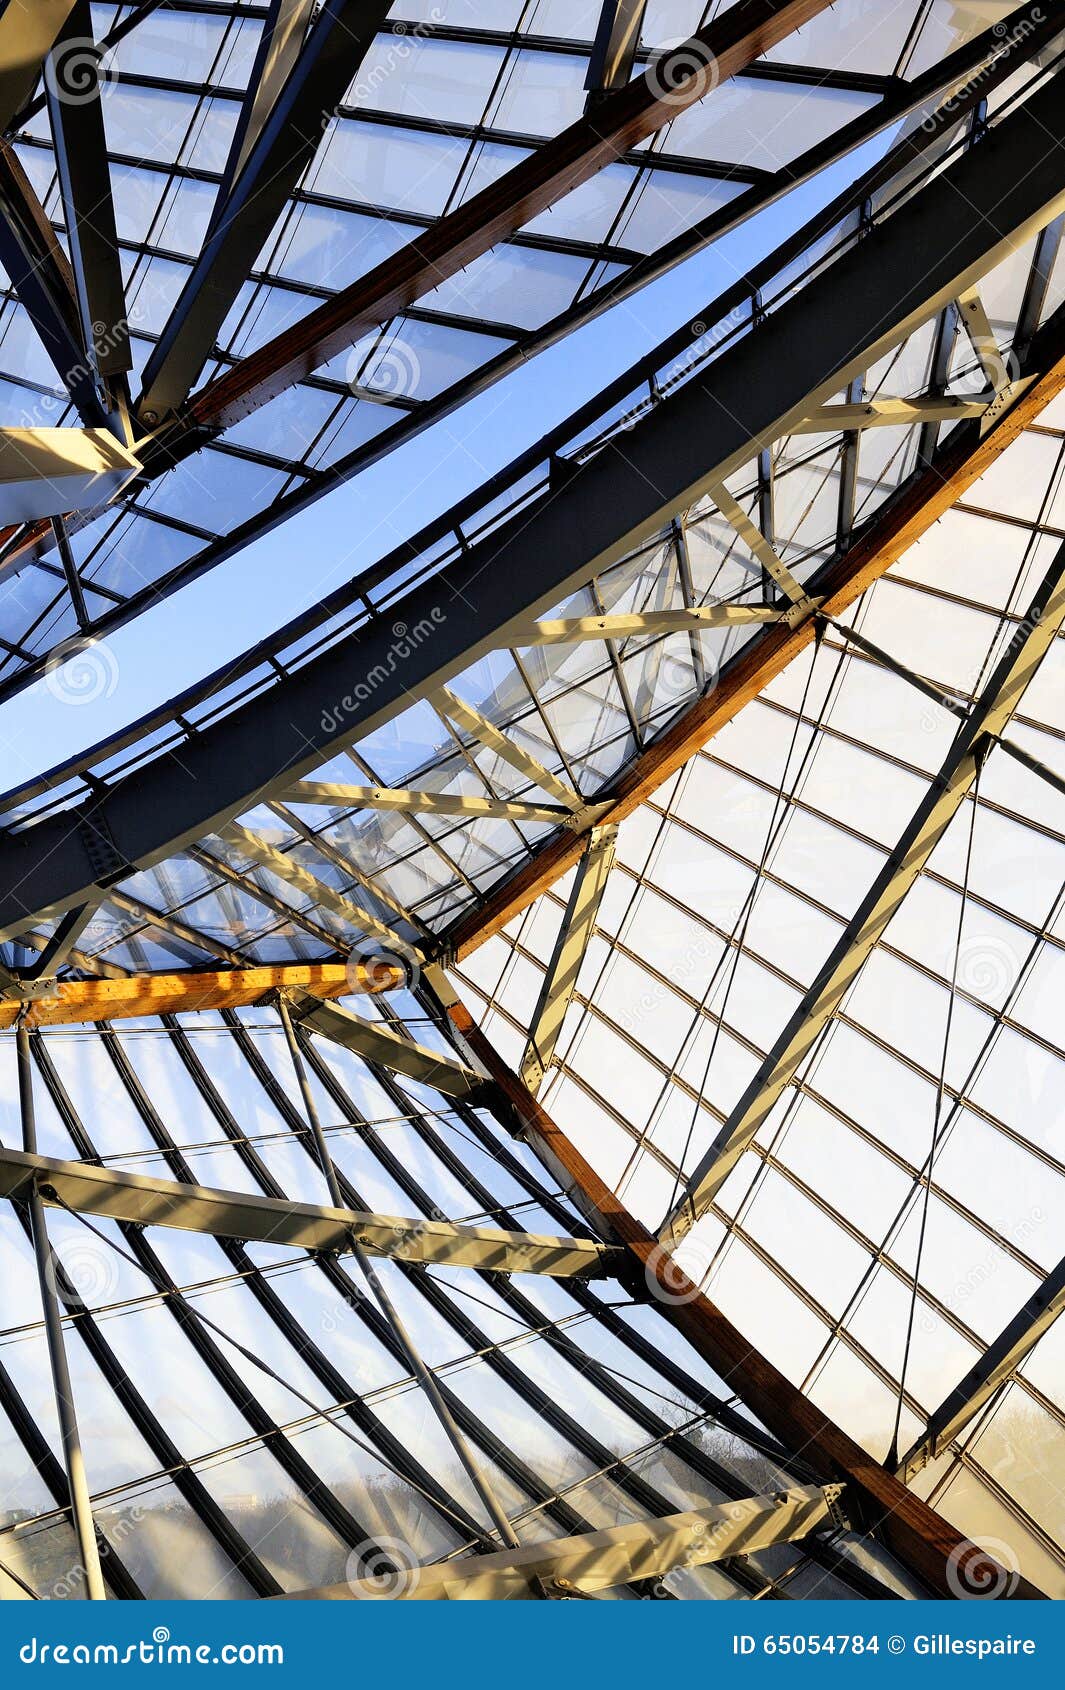 Museum Of Contemporary Art Of The Louis Vuitton Foundation Editorial Stock Image - Image of ...